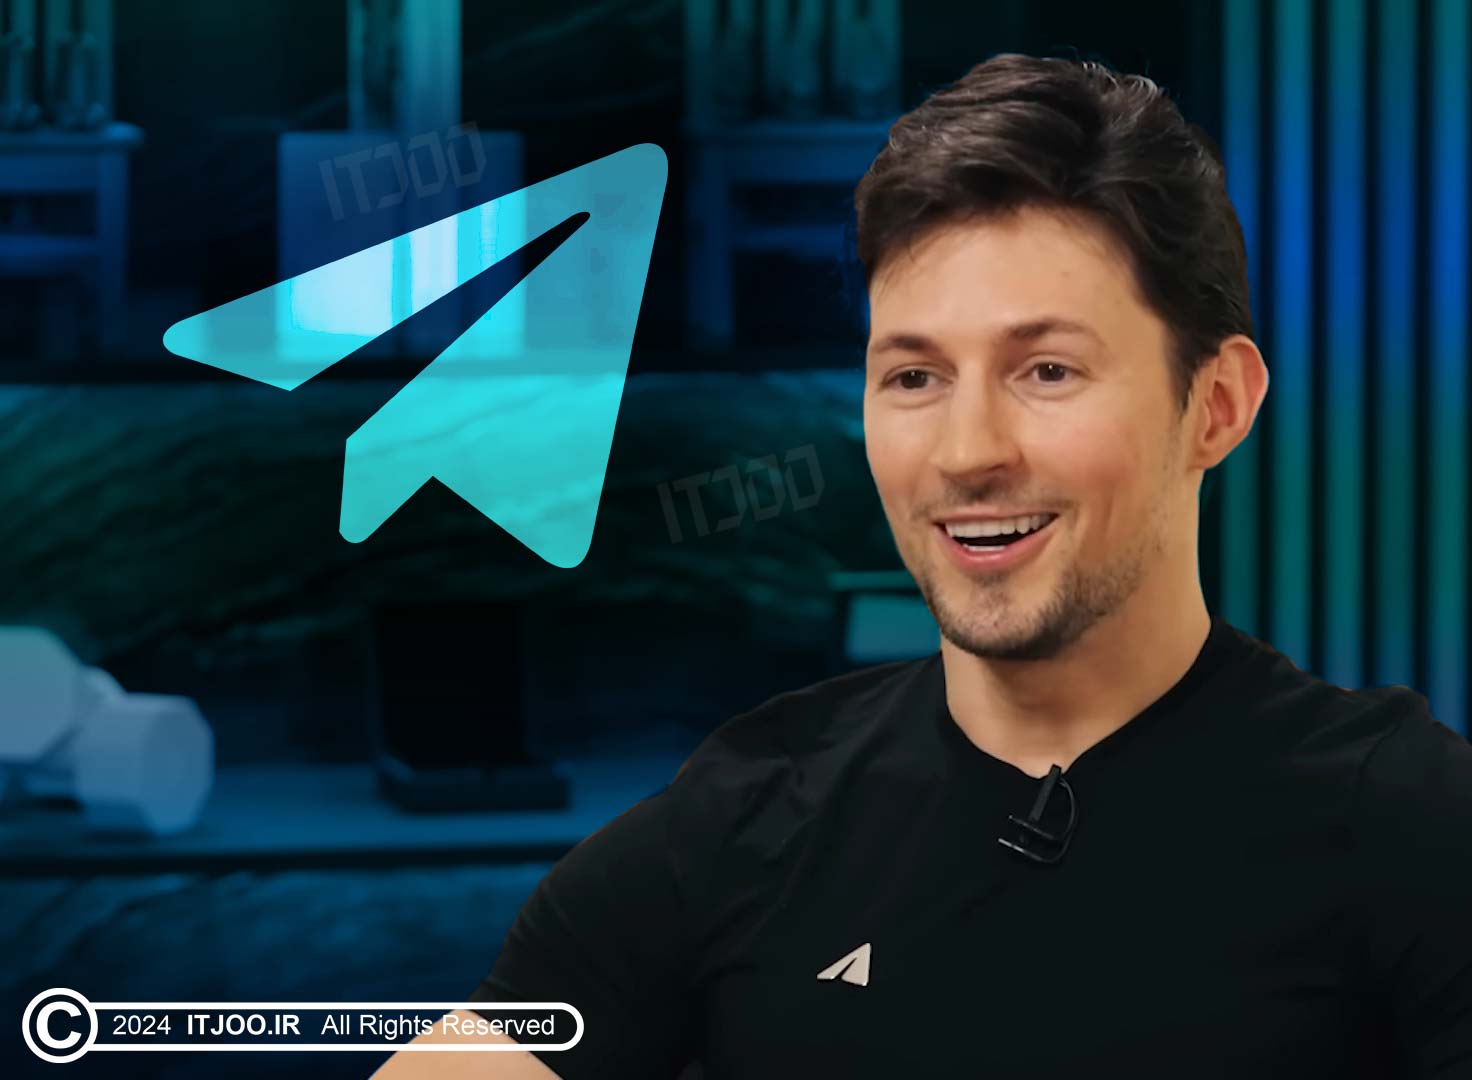 pavel durov says he doesnt own real estate or a yacht and his focus is only on telegram